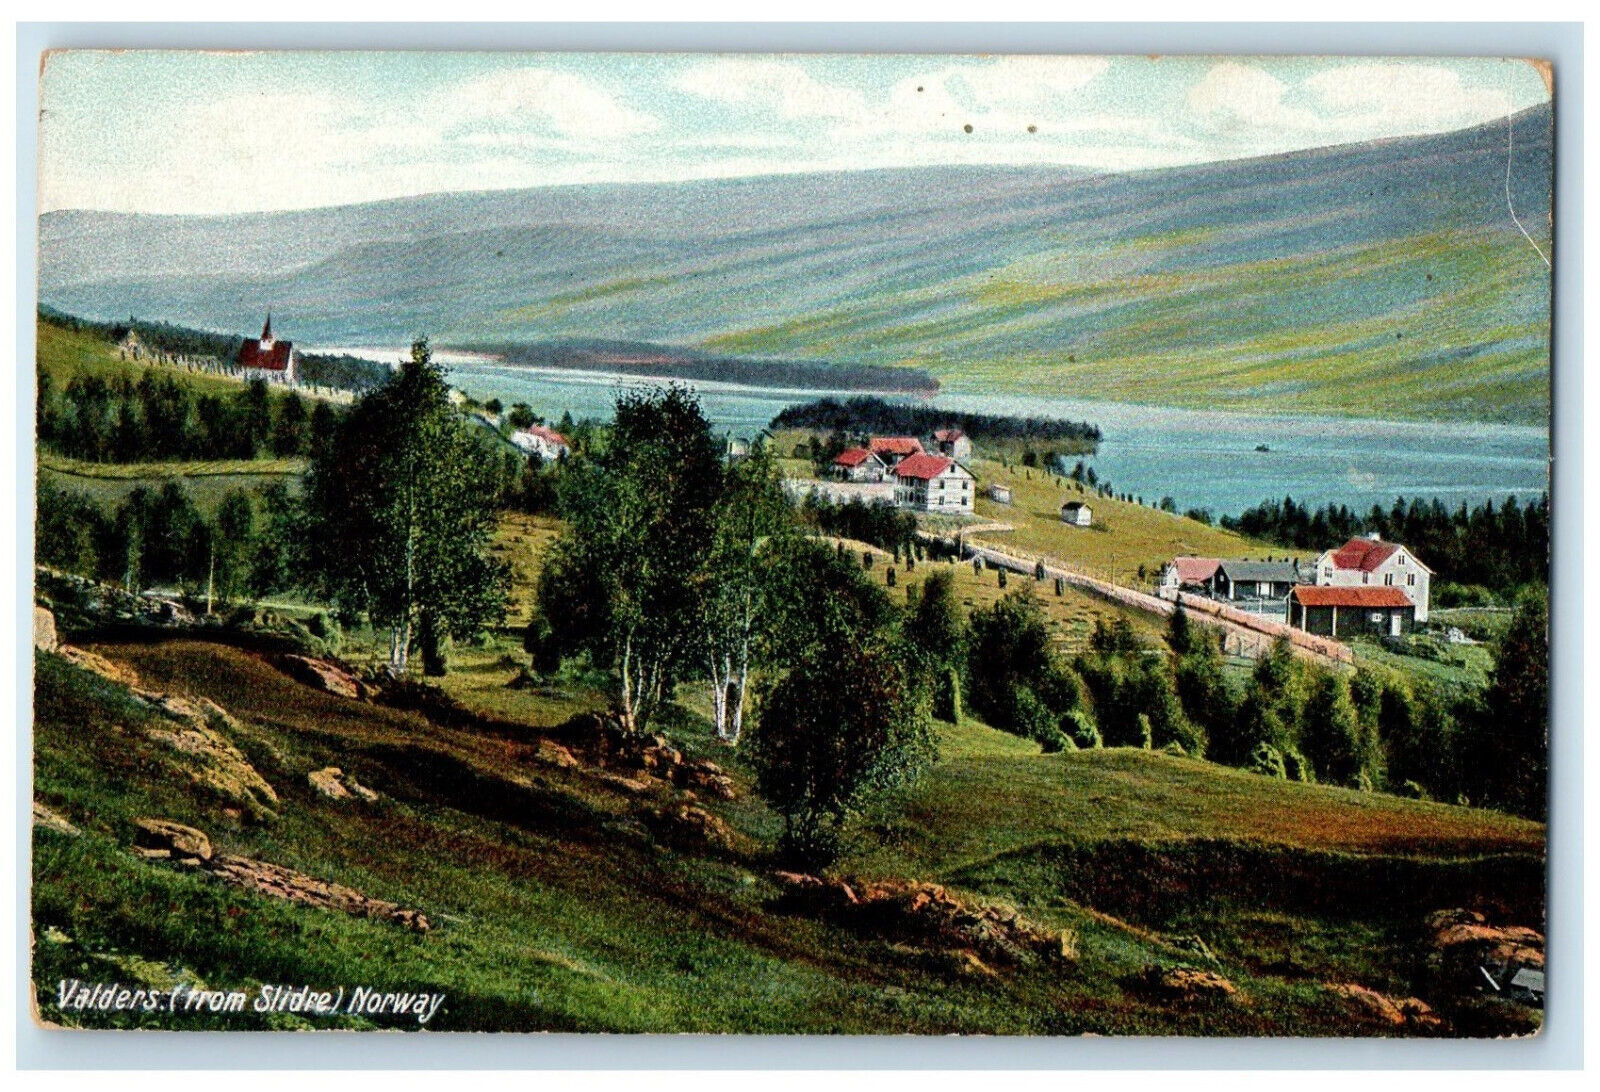 c1910 Valdres From Slidre Norway Mountains Buildings Greenery Scene Postcard